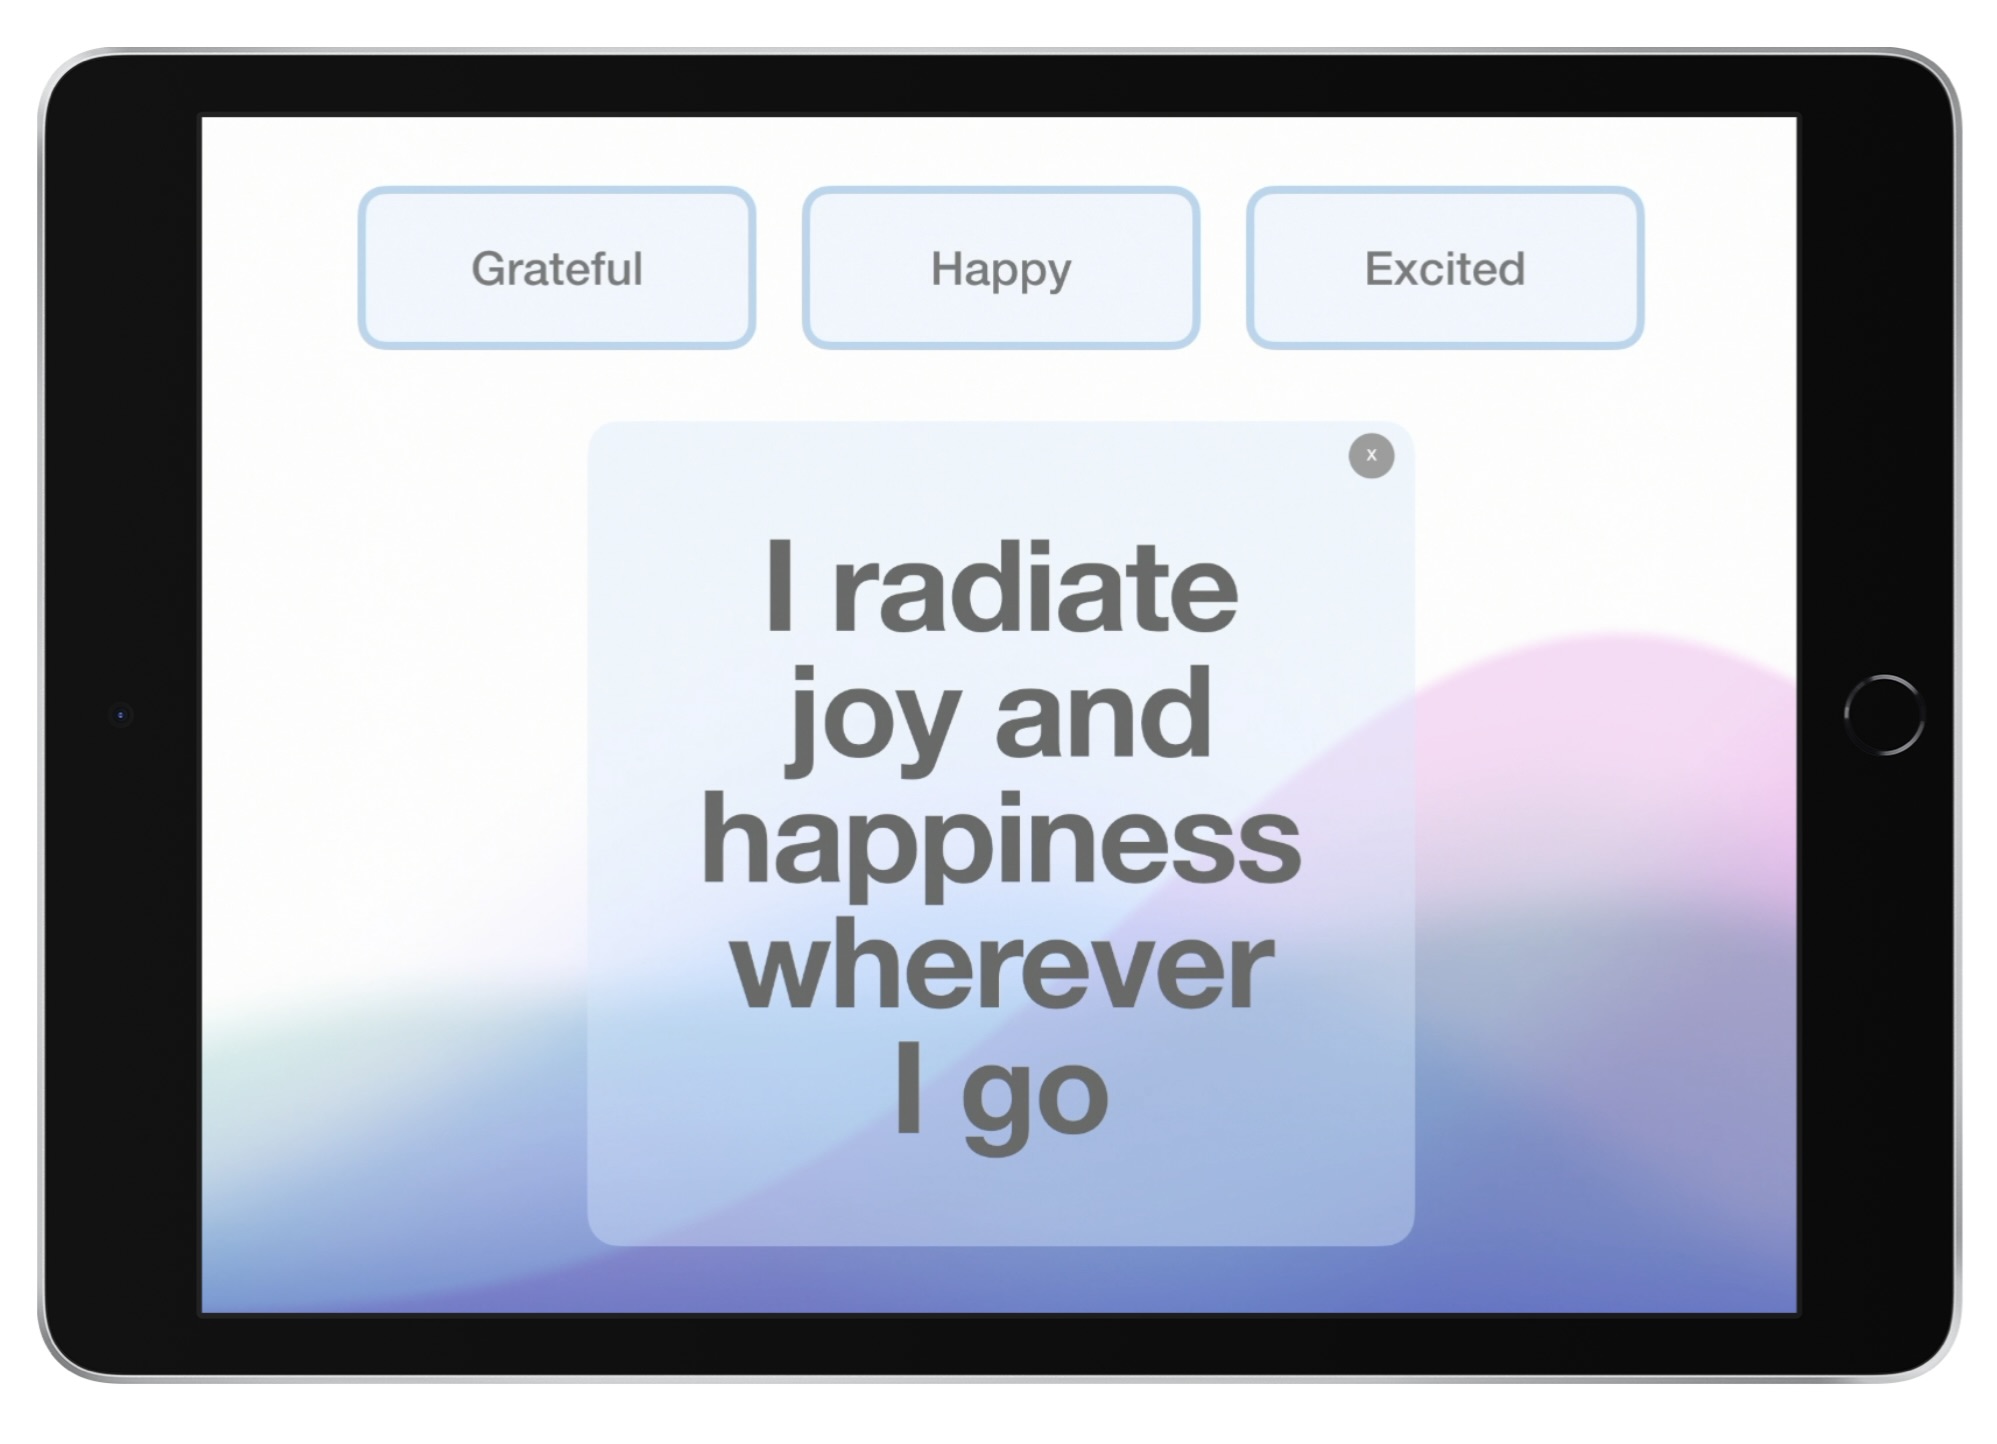 Image of a simple app designed in Keynote that shows affirmations.